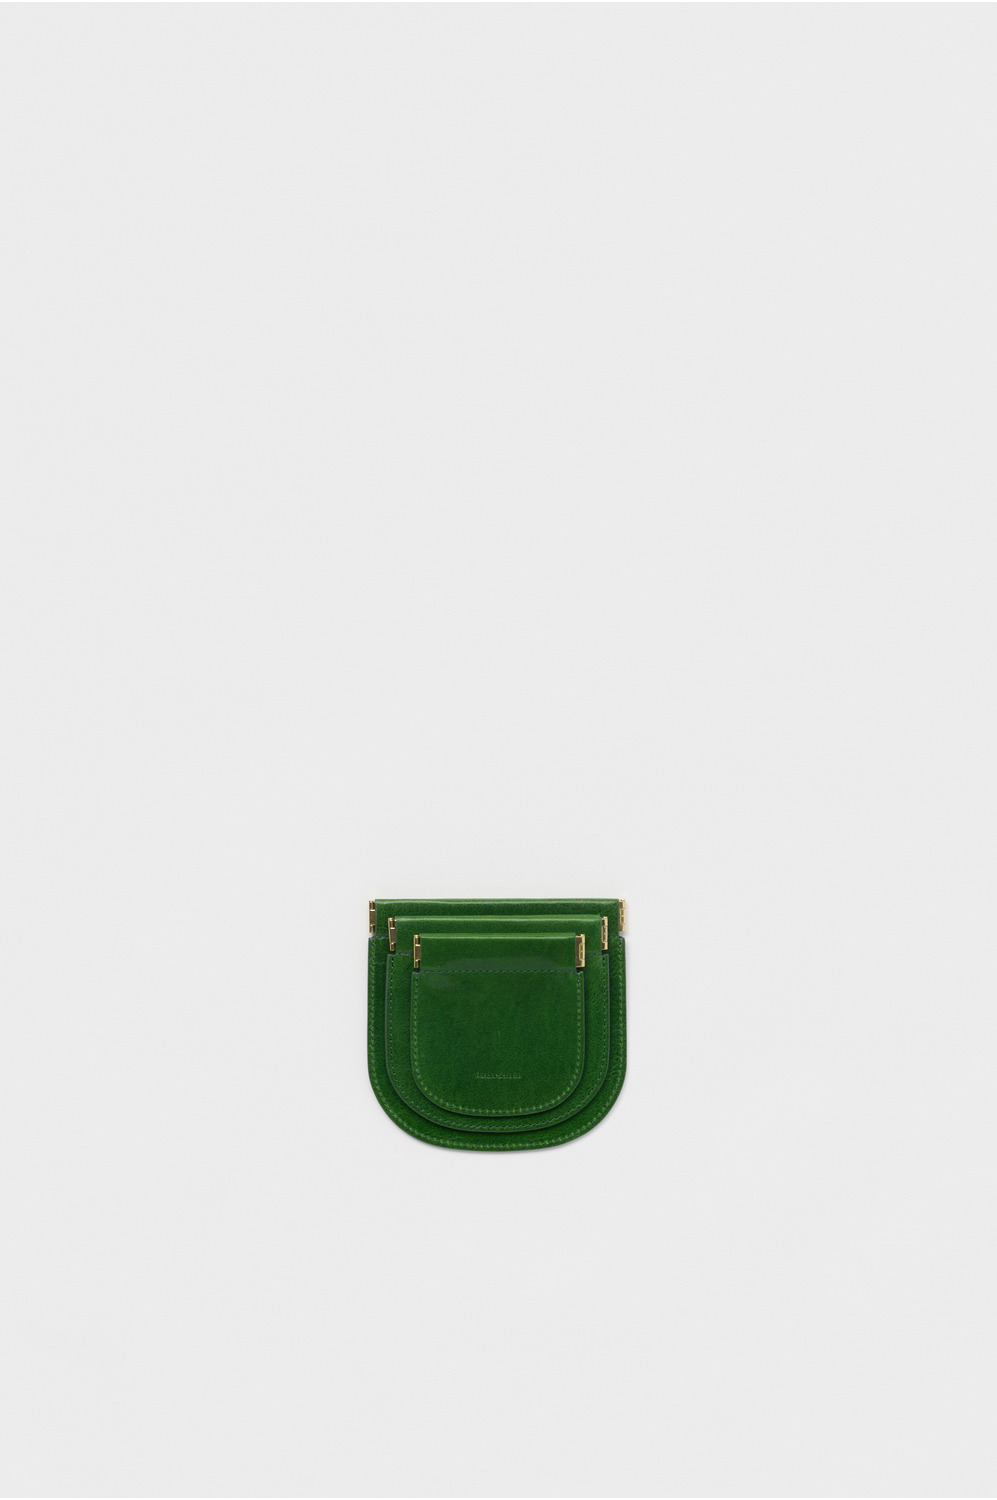 coin purse S 詳細画像 lime green 2